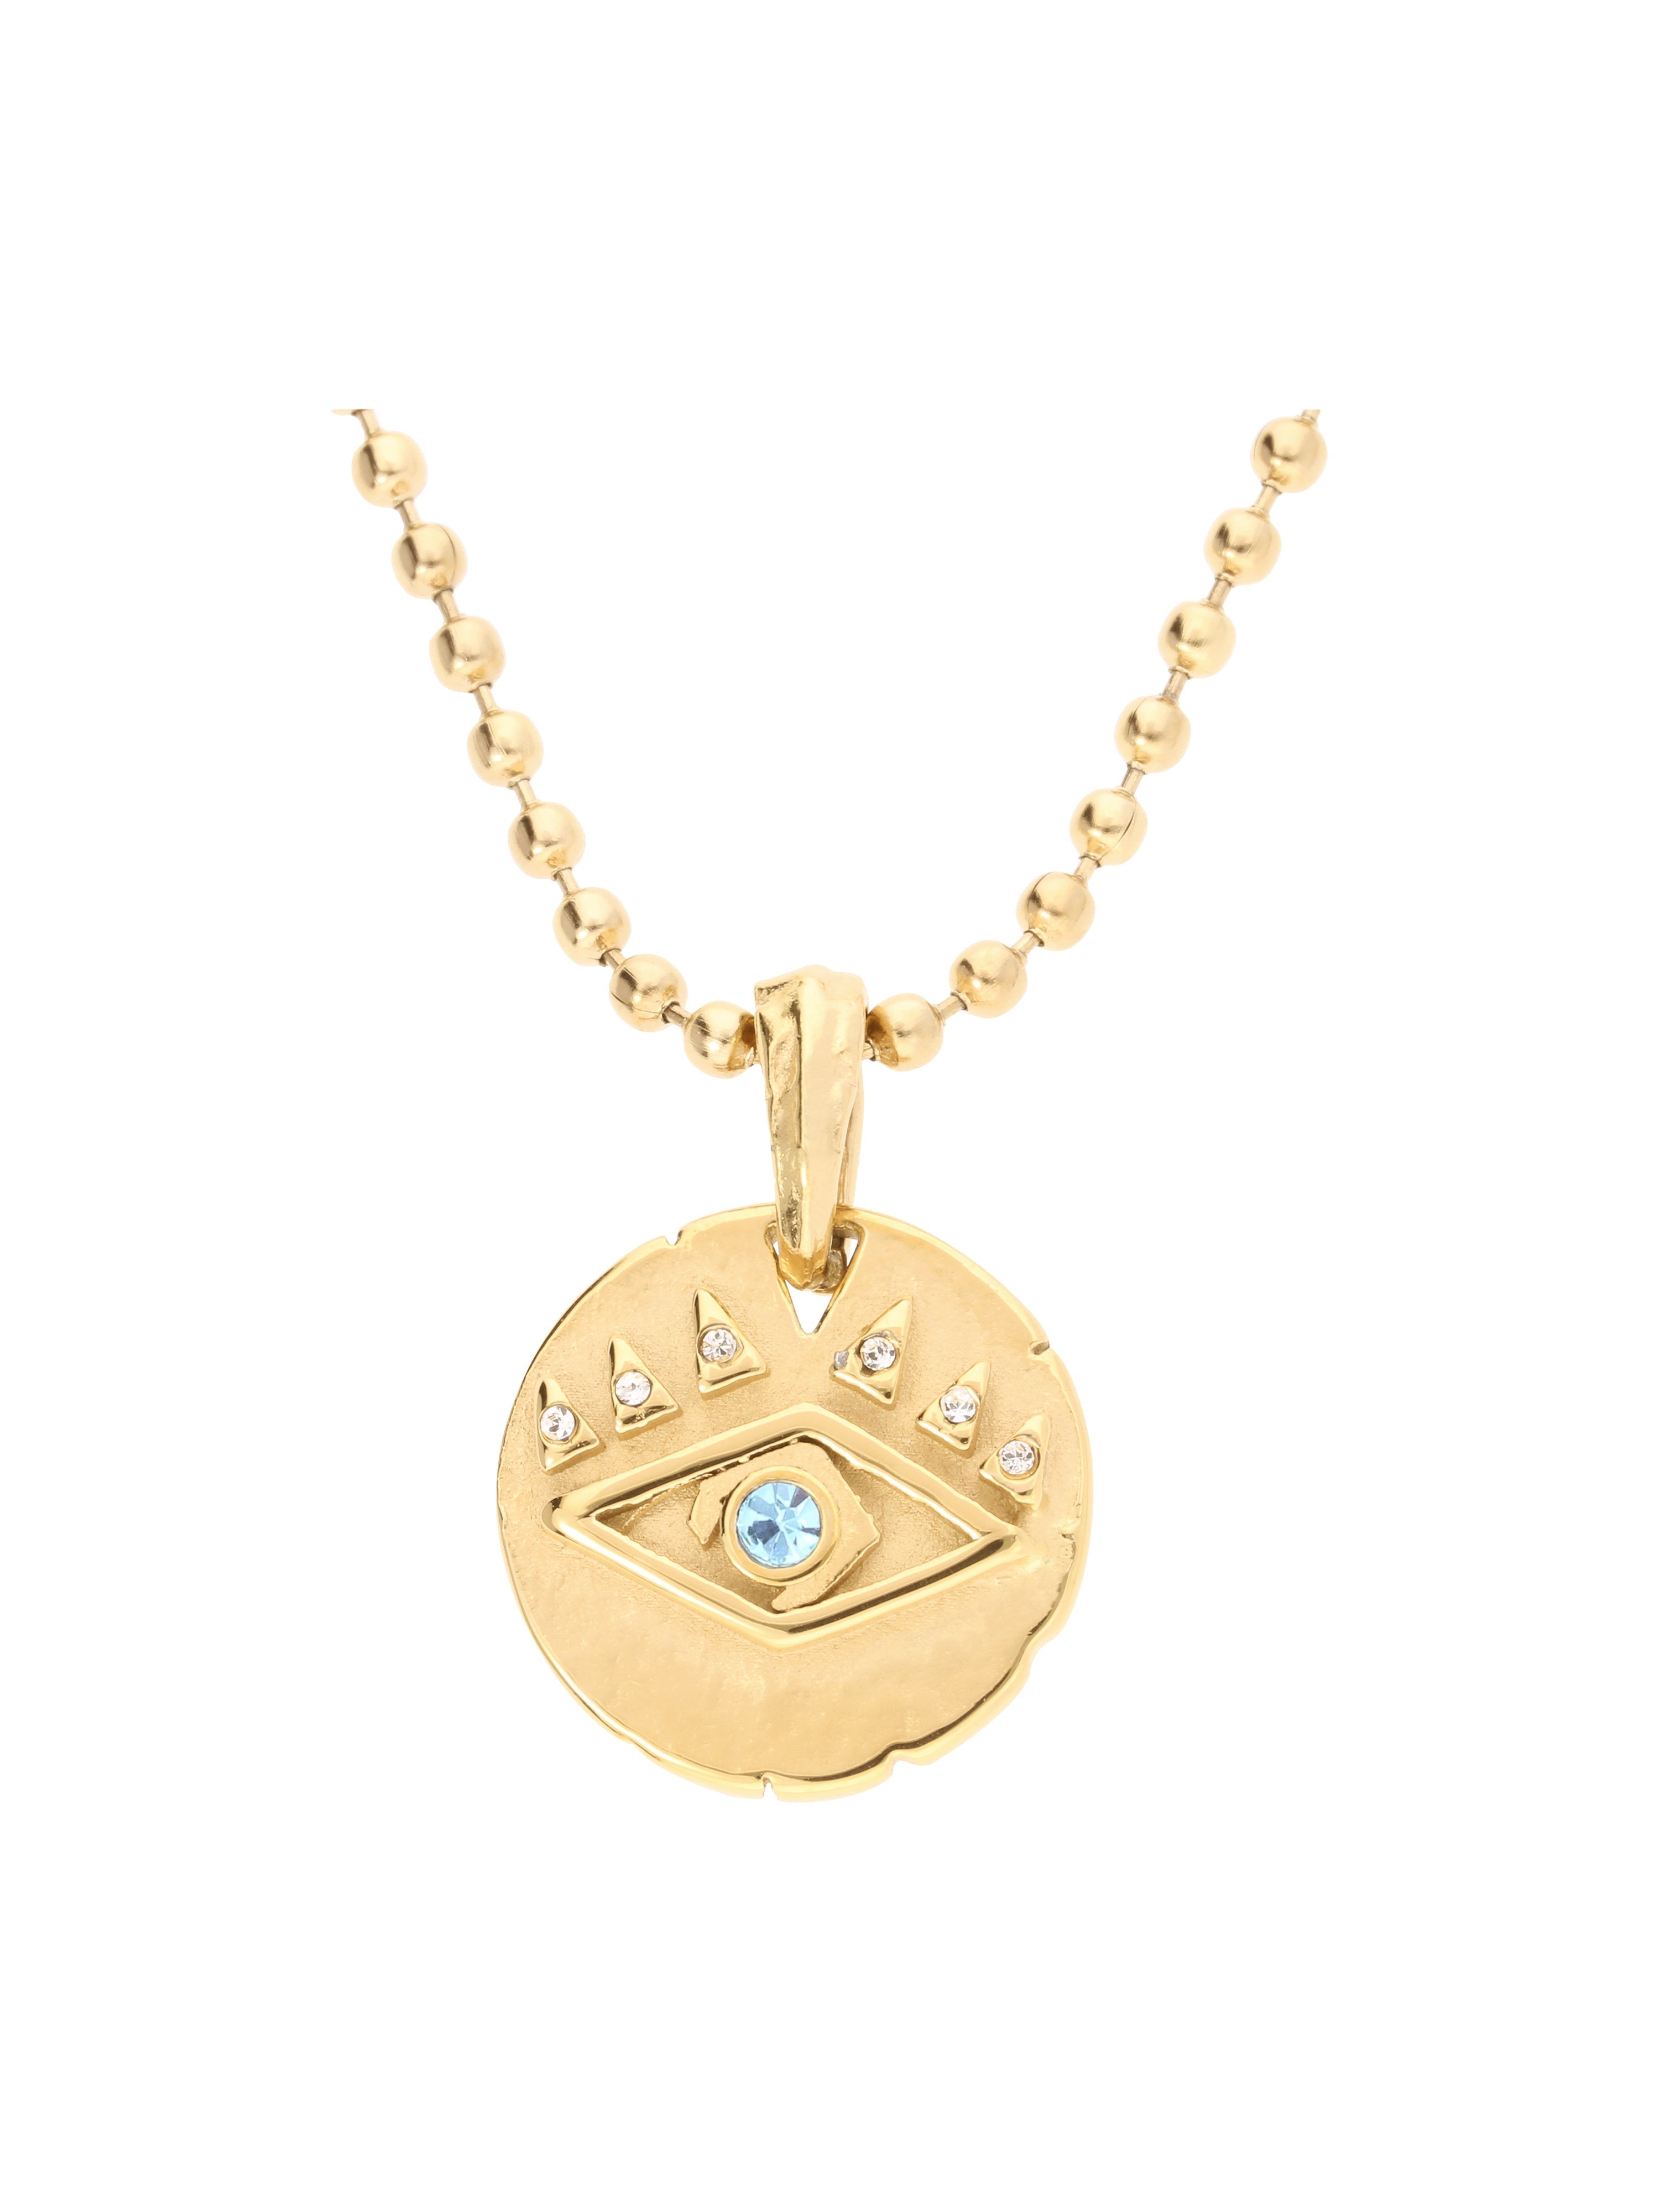 Protection Eye Necklace - Blue